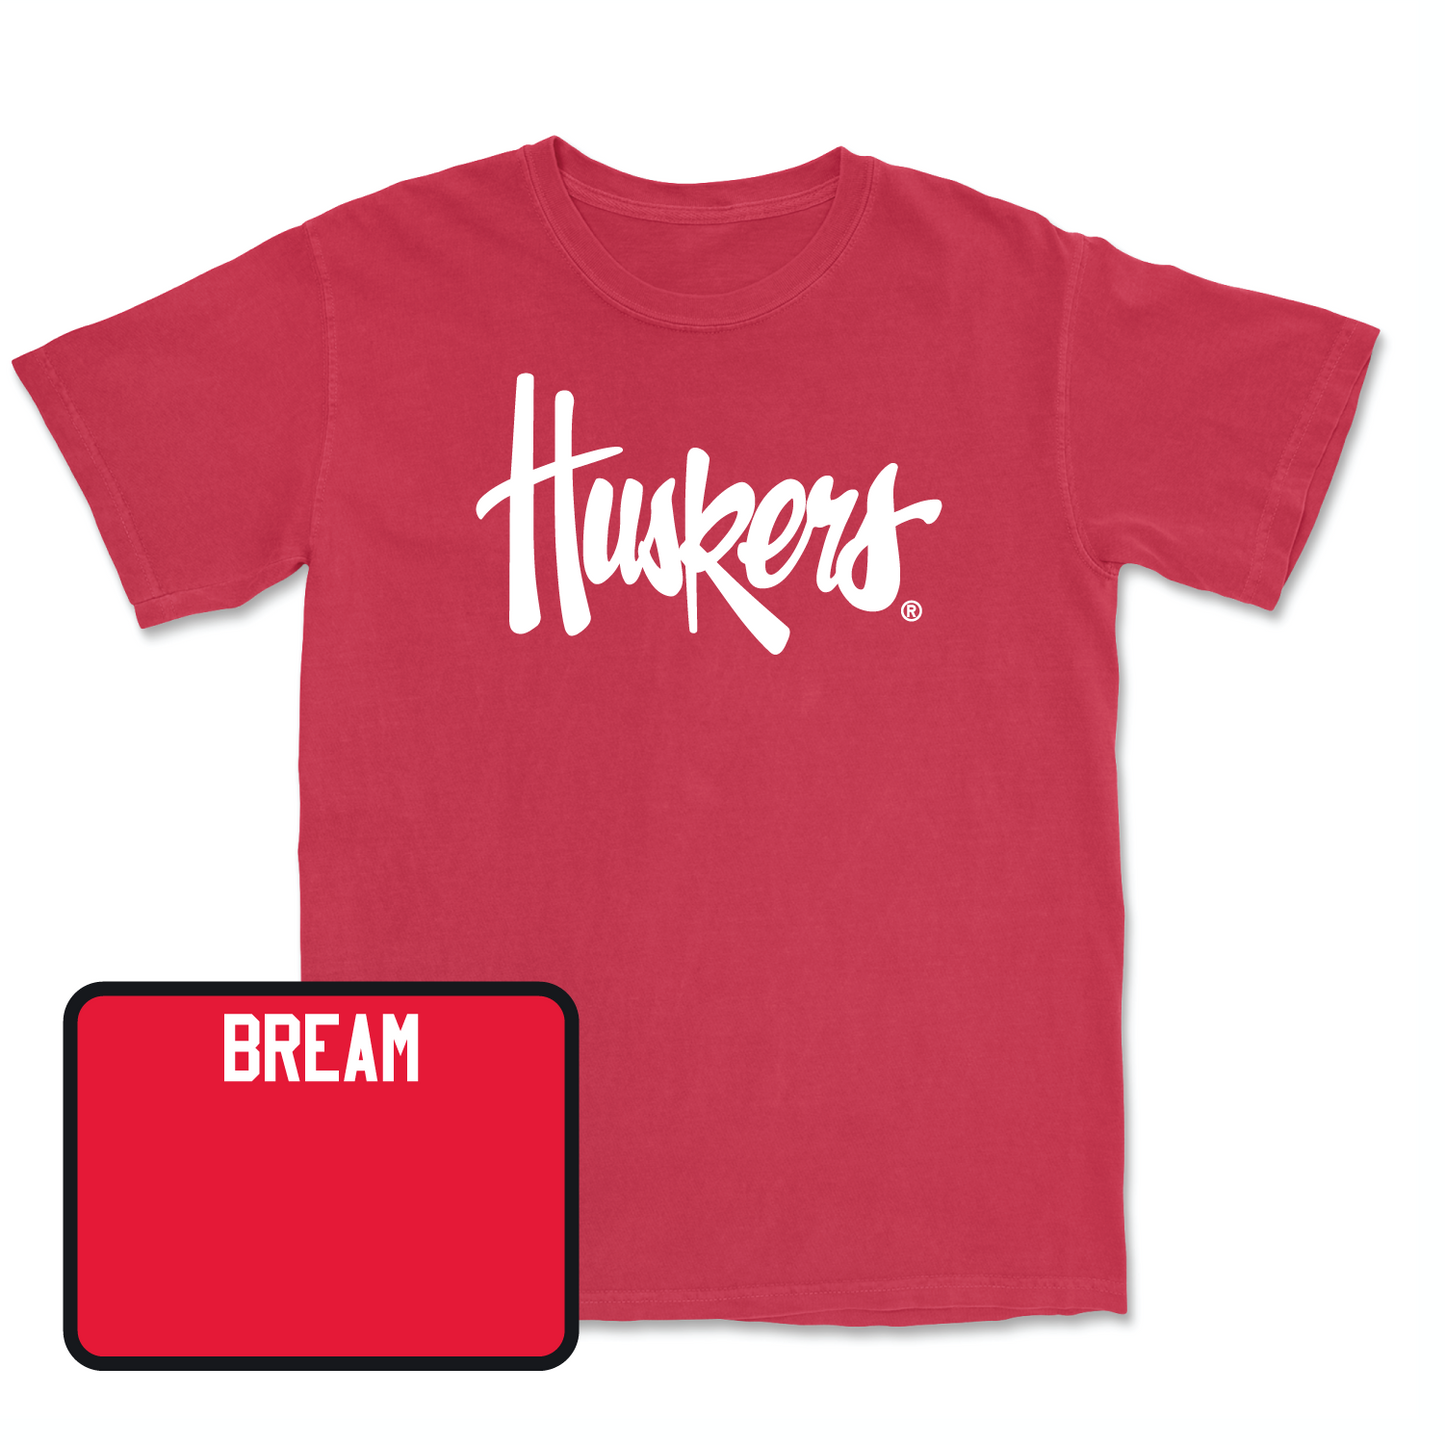 Red Women's Golf Huskers Tee Small / Brooke Bream